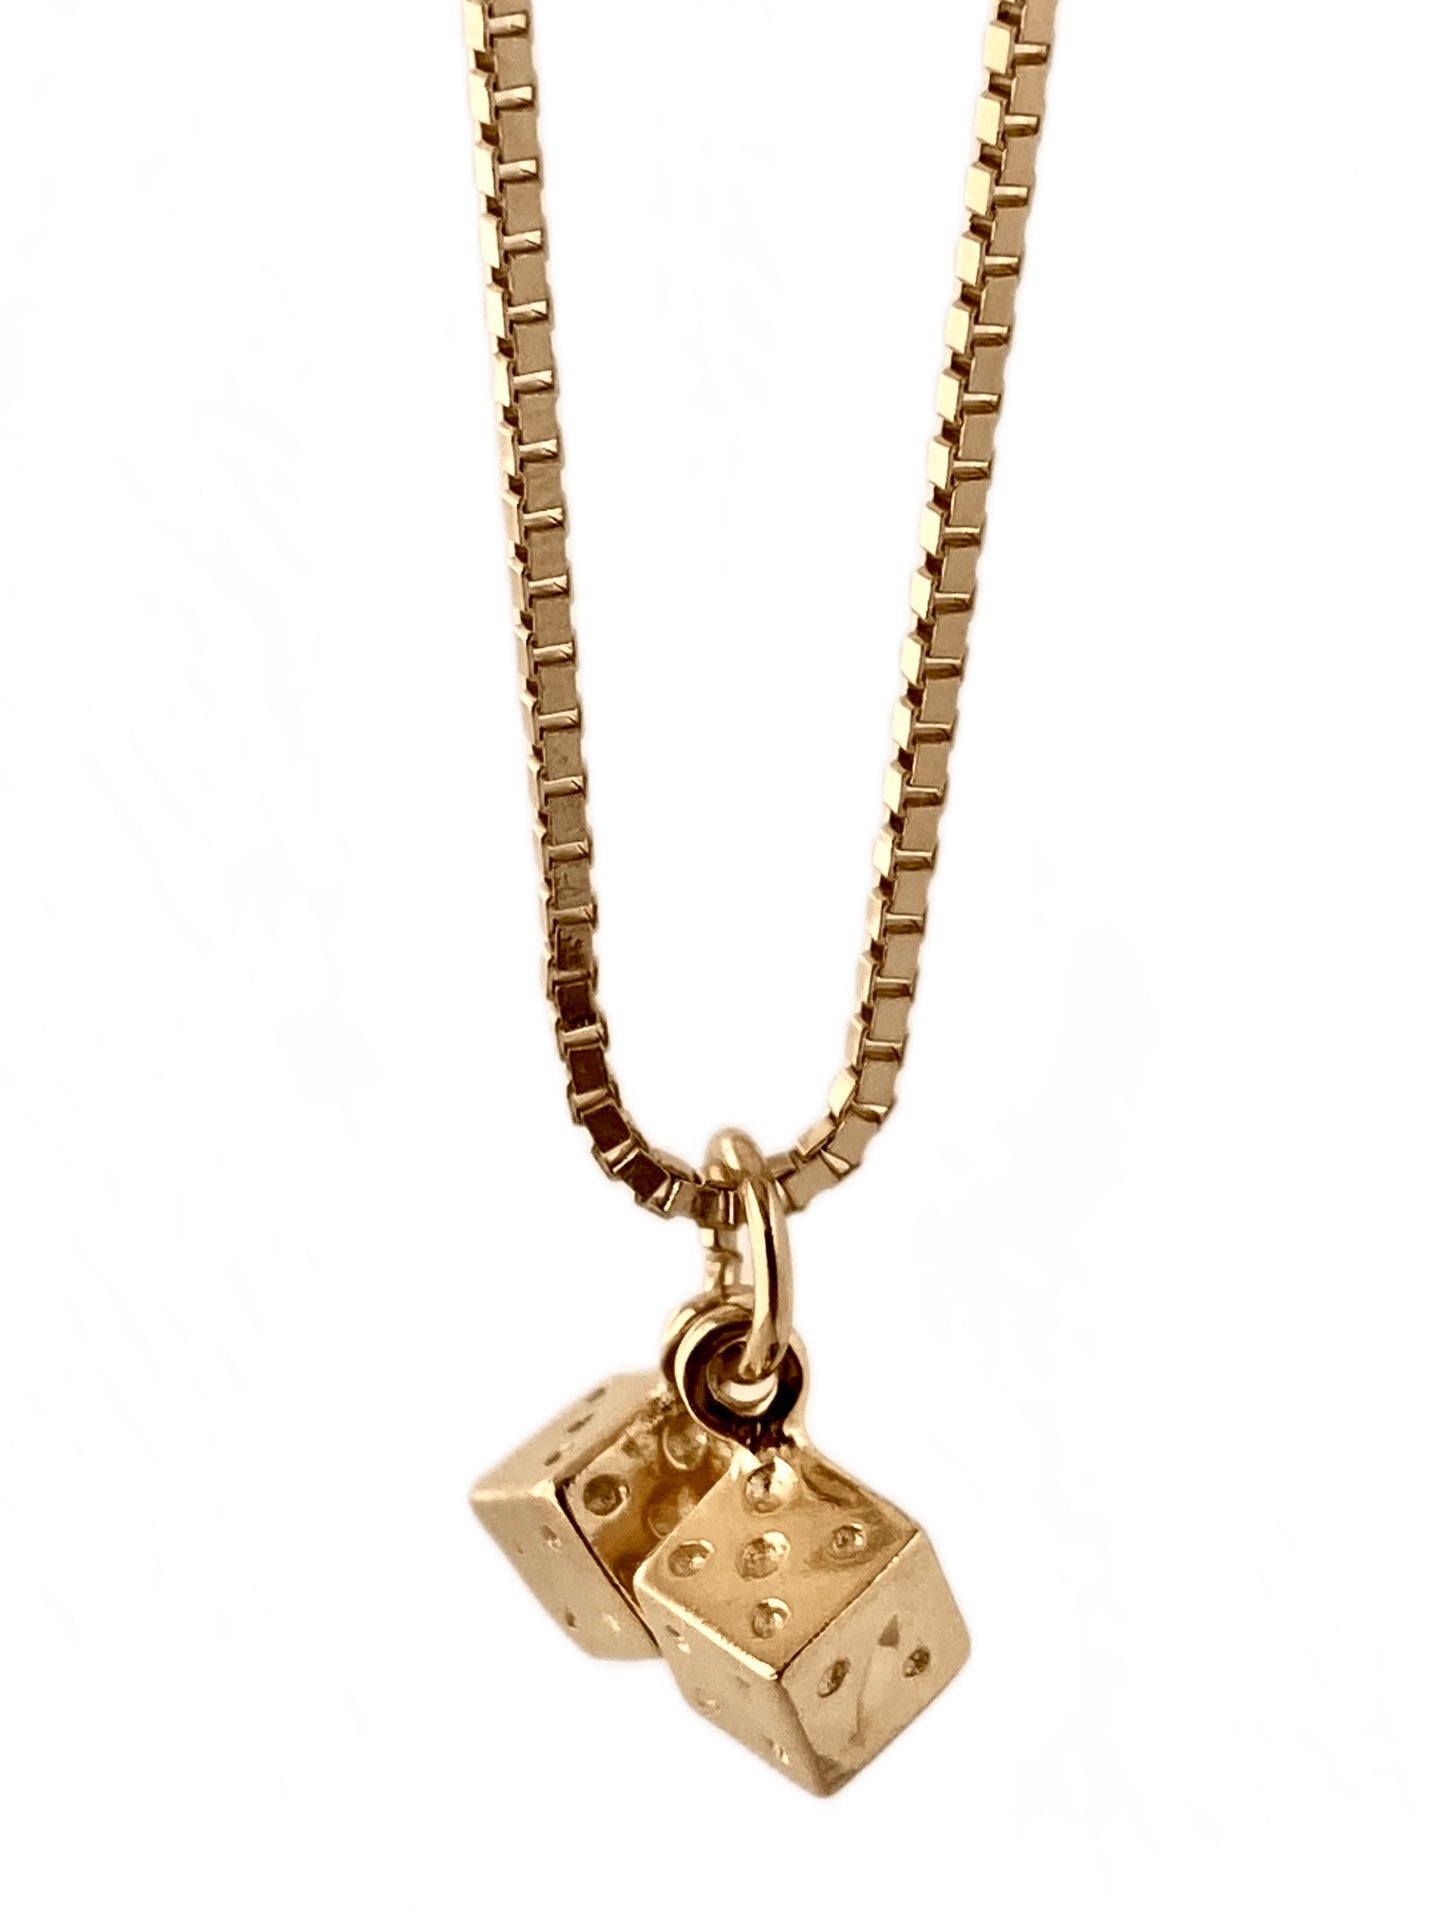 The Henderson Dice Necklace